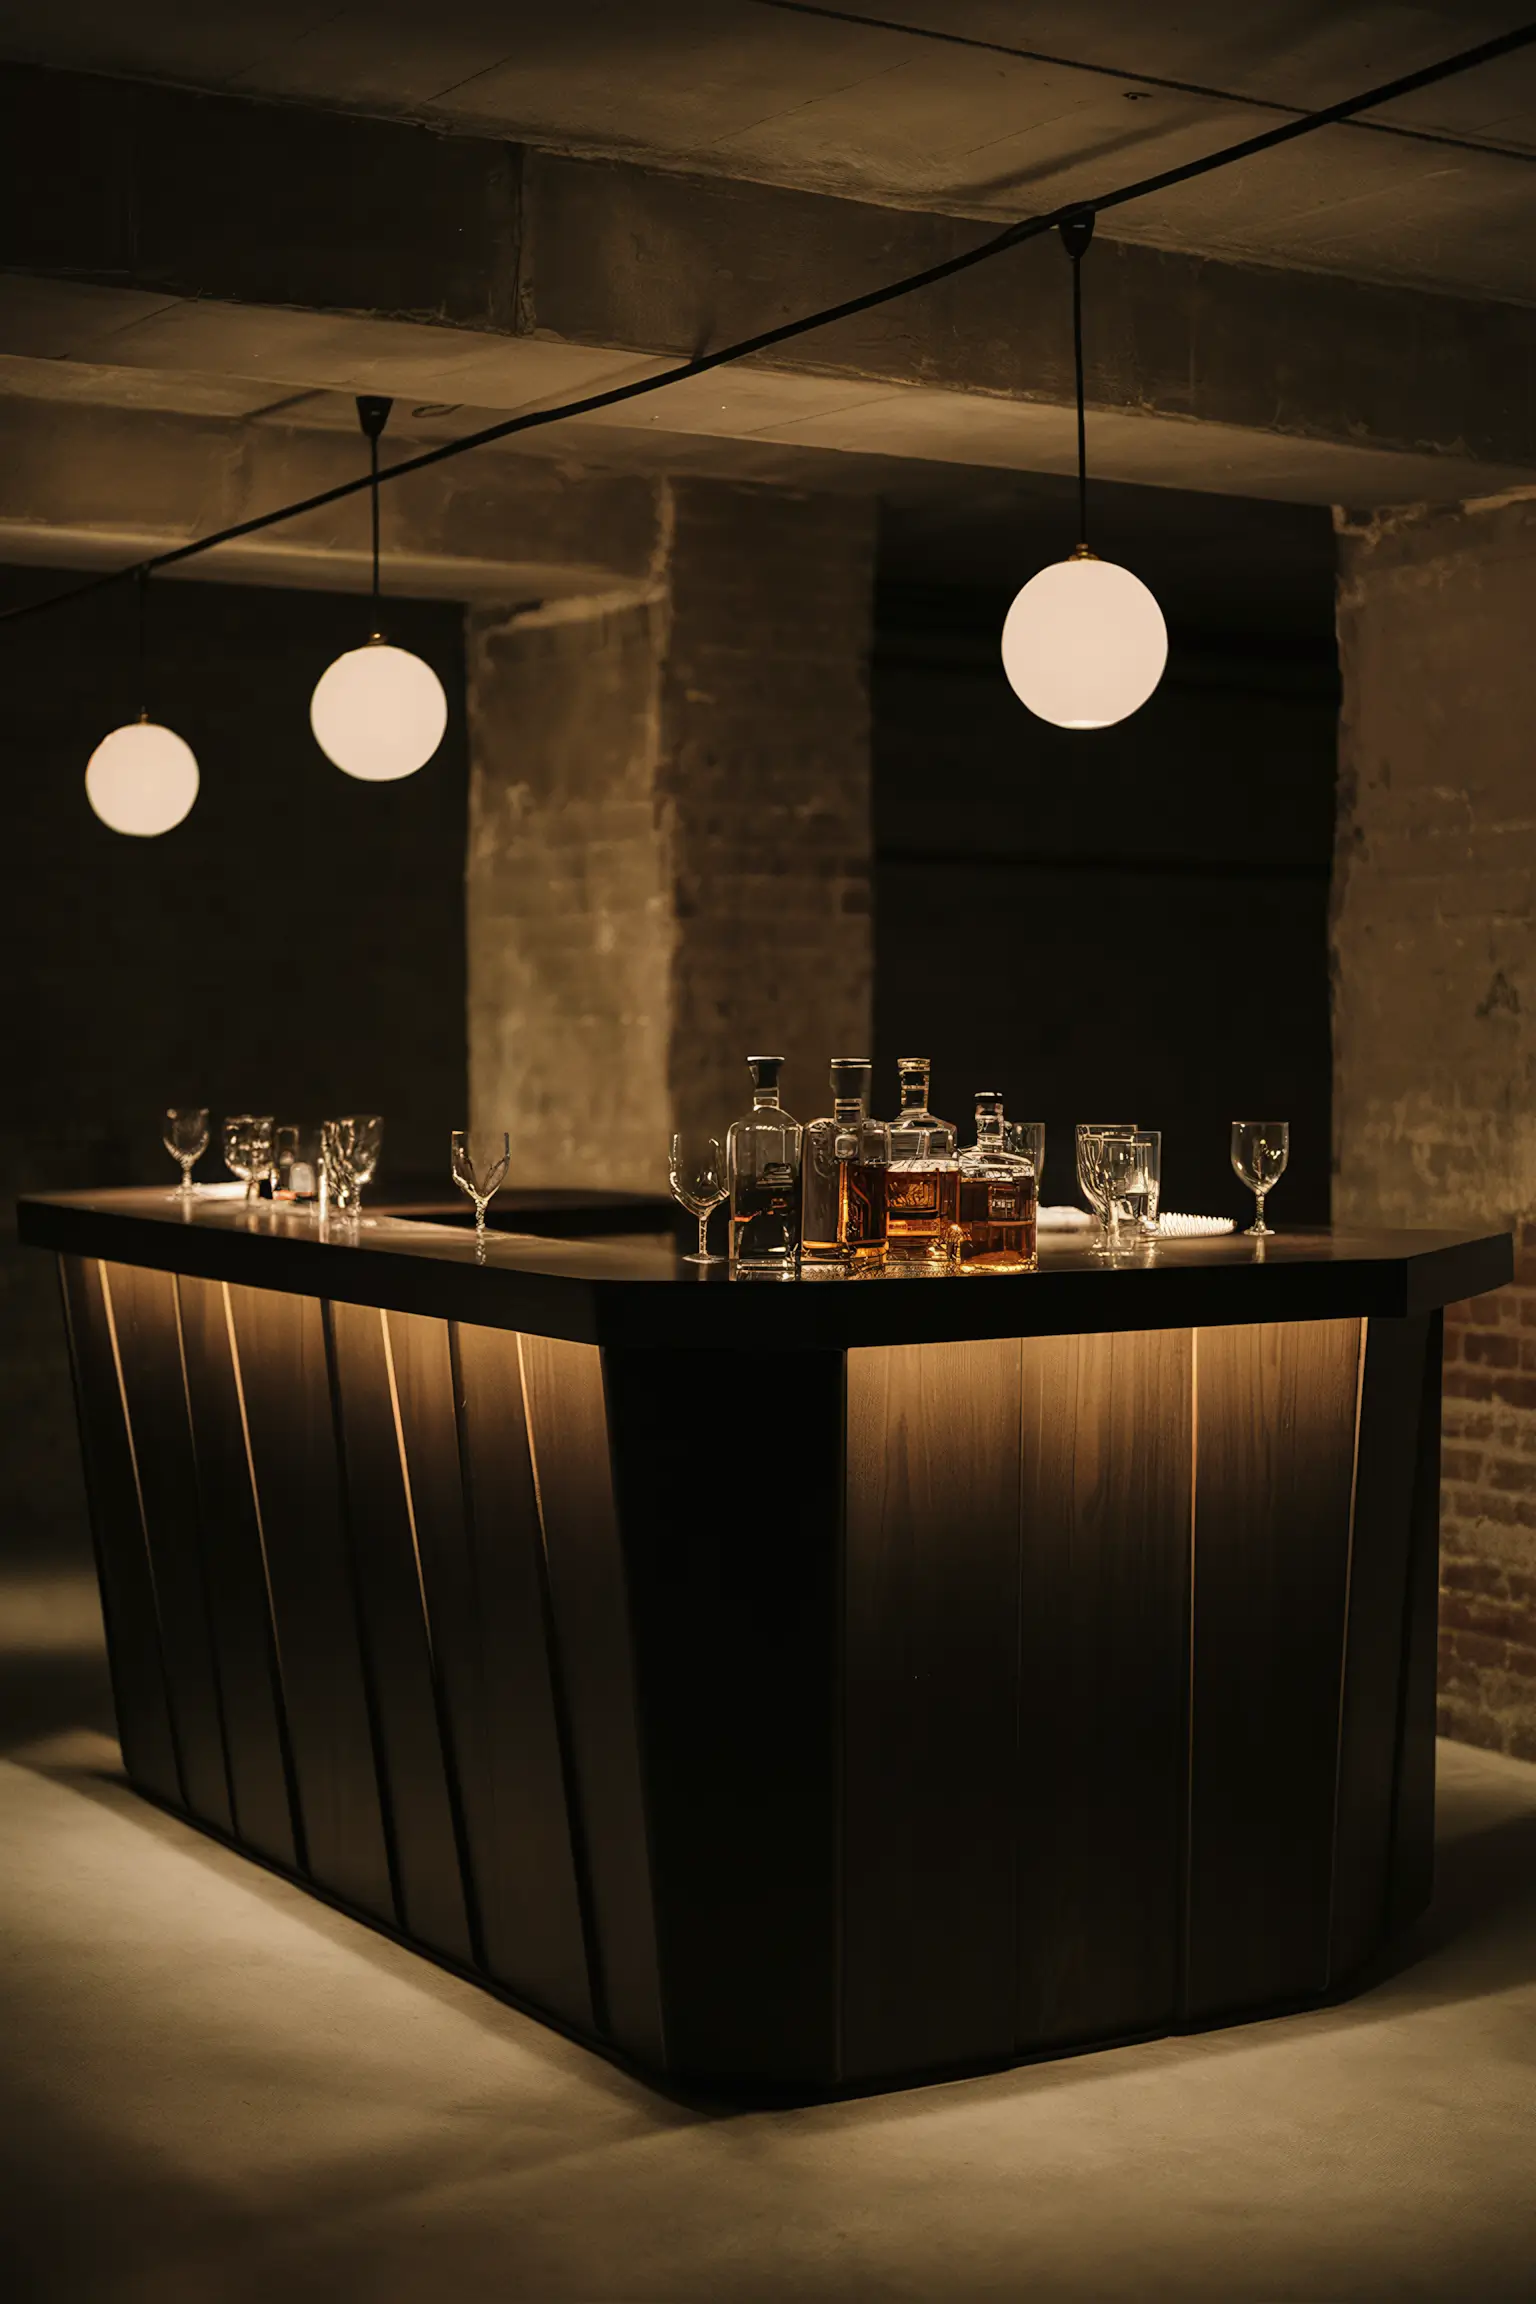 Minimalistic basement bar with stylish counter and ambient lighting.